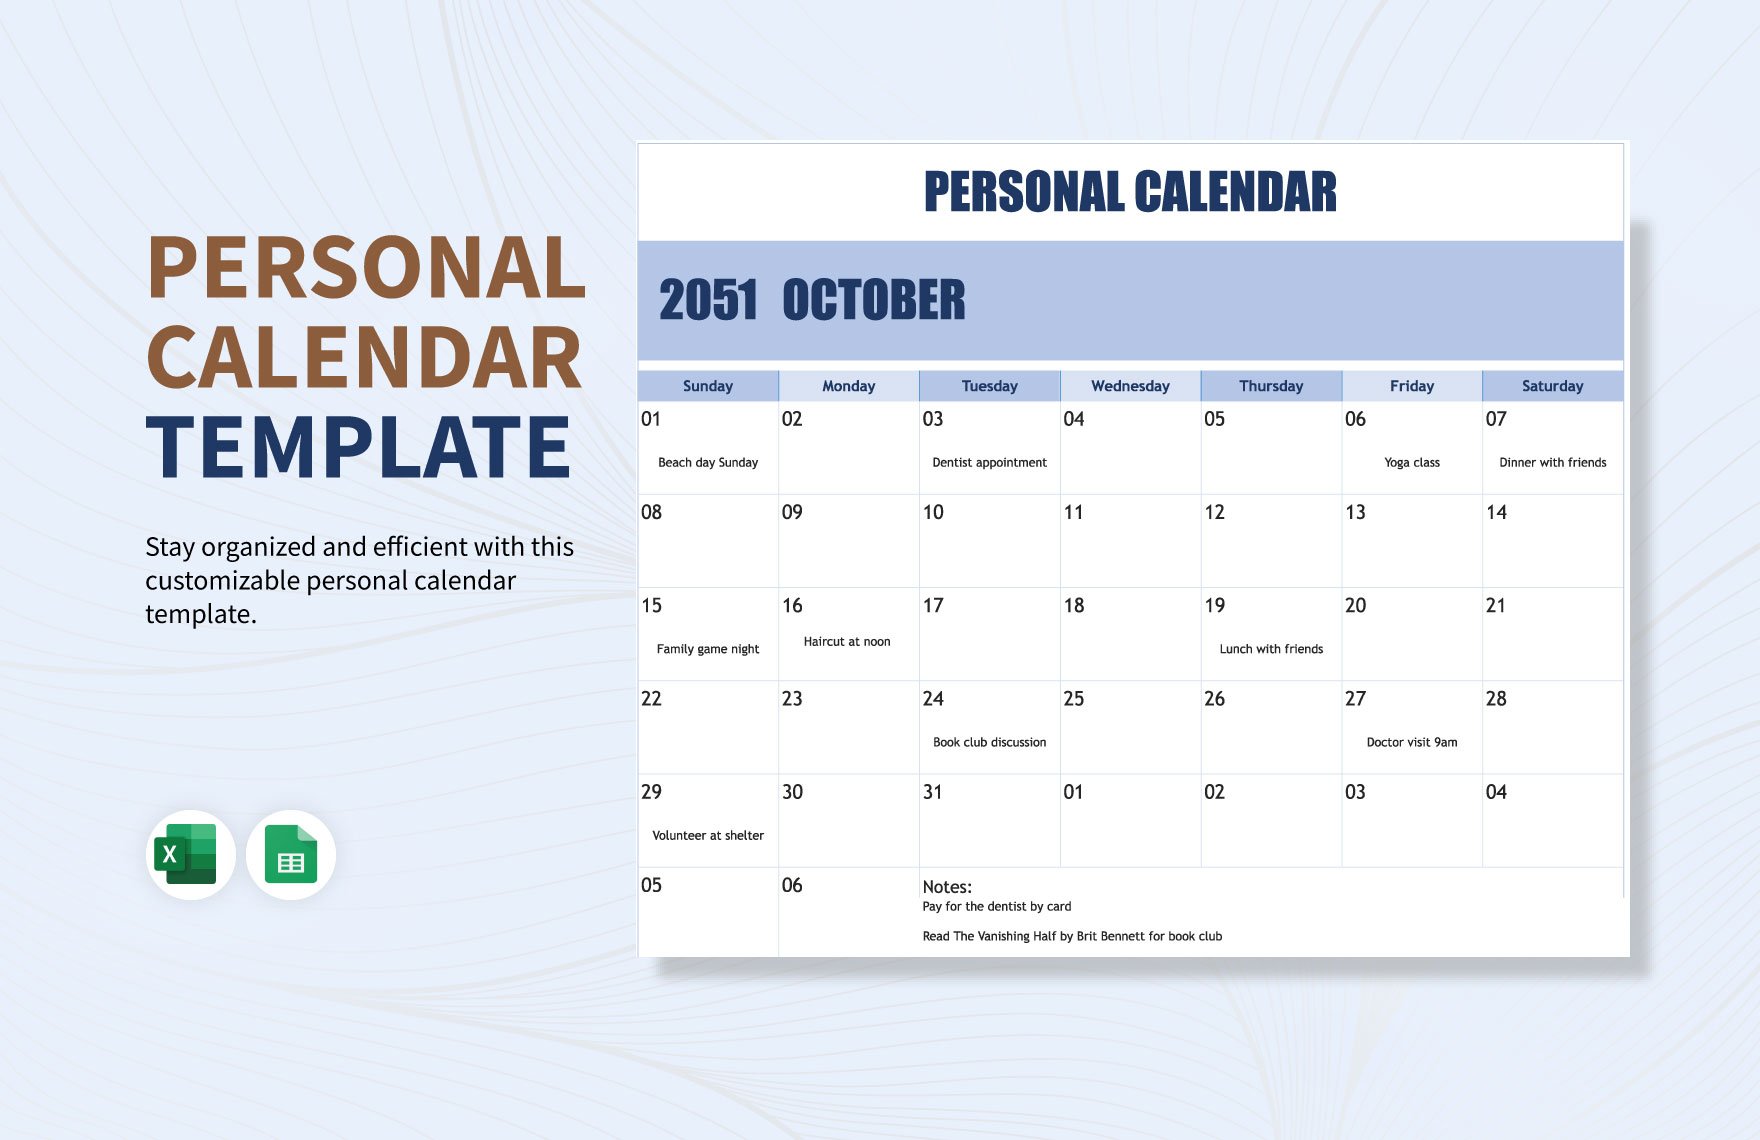 Personal Calendar in Excel, Google Sheets